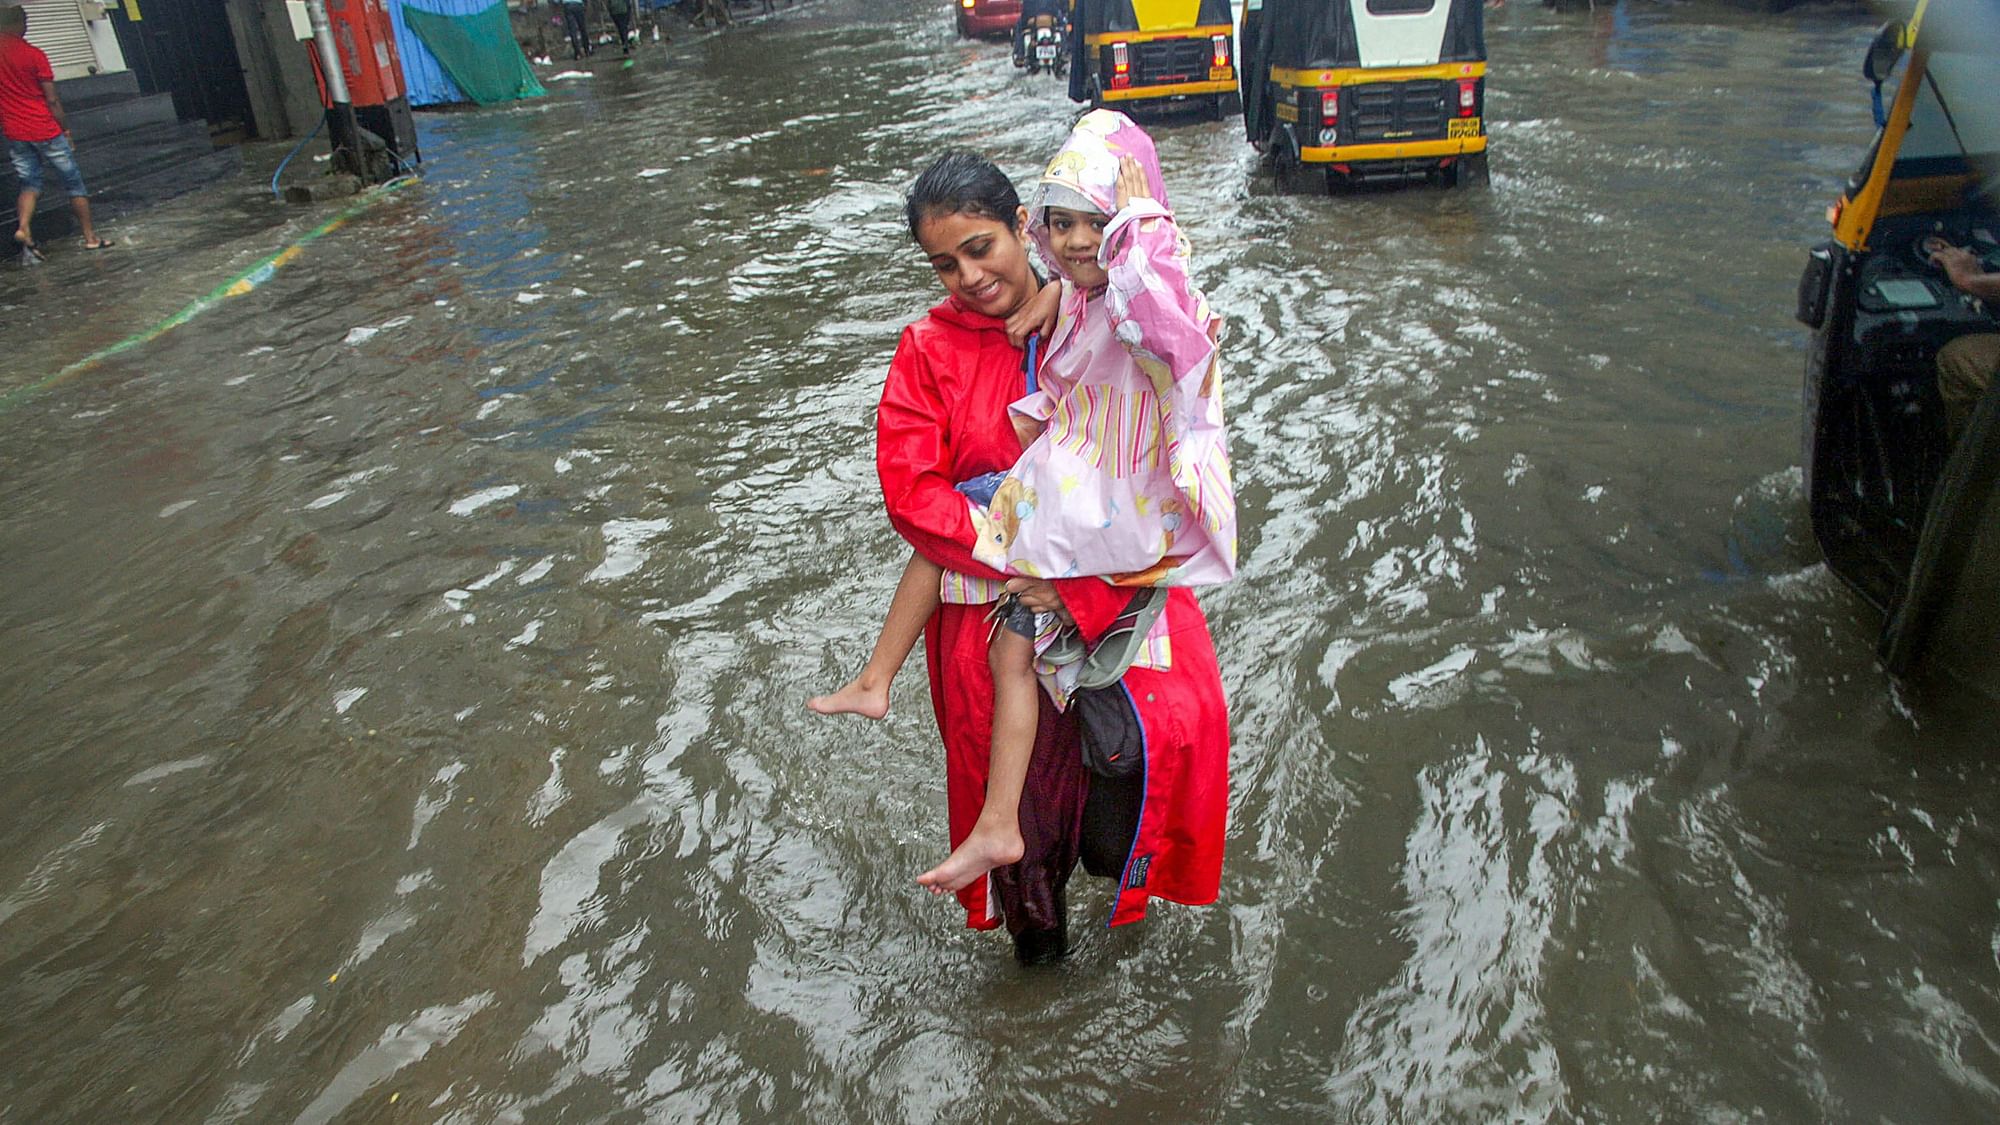 A mother carries her child in a water-logged street of Mumbai